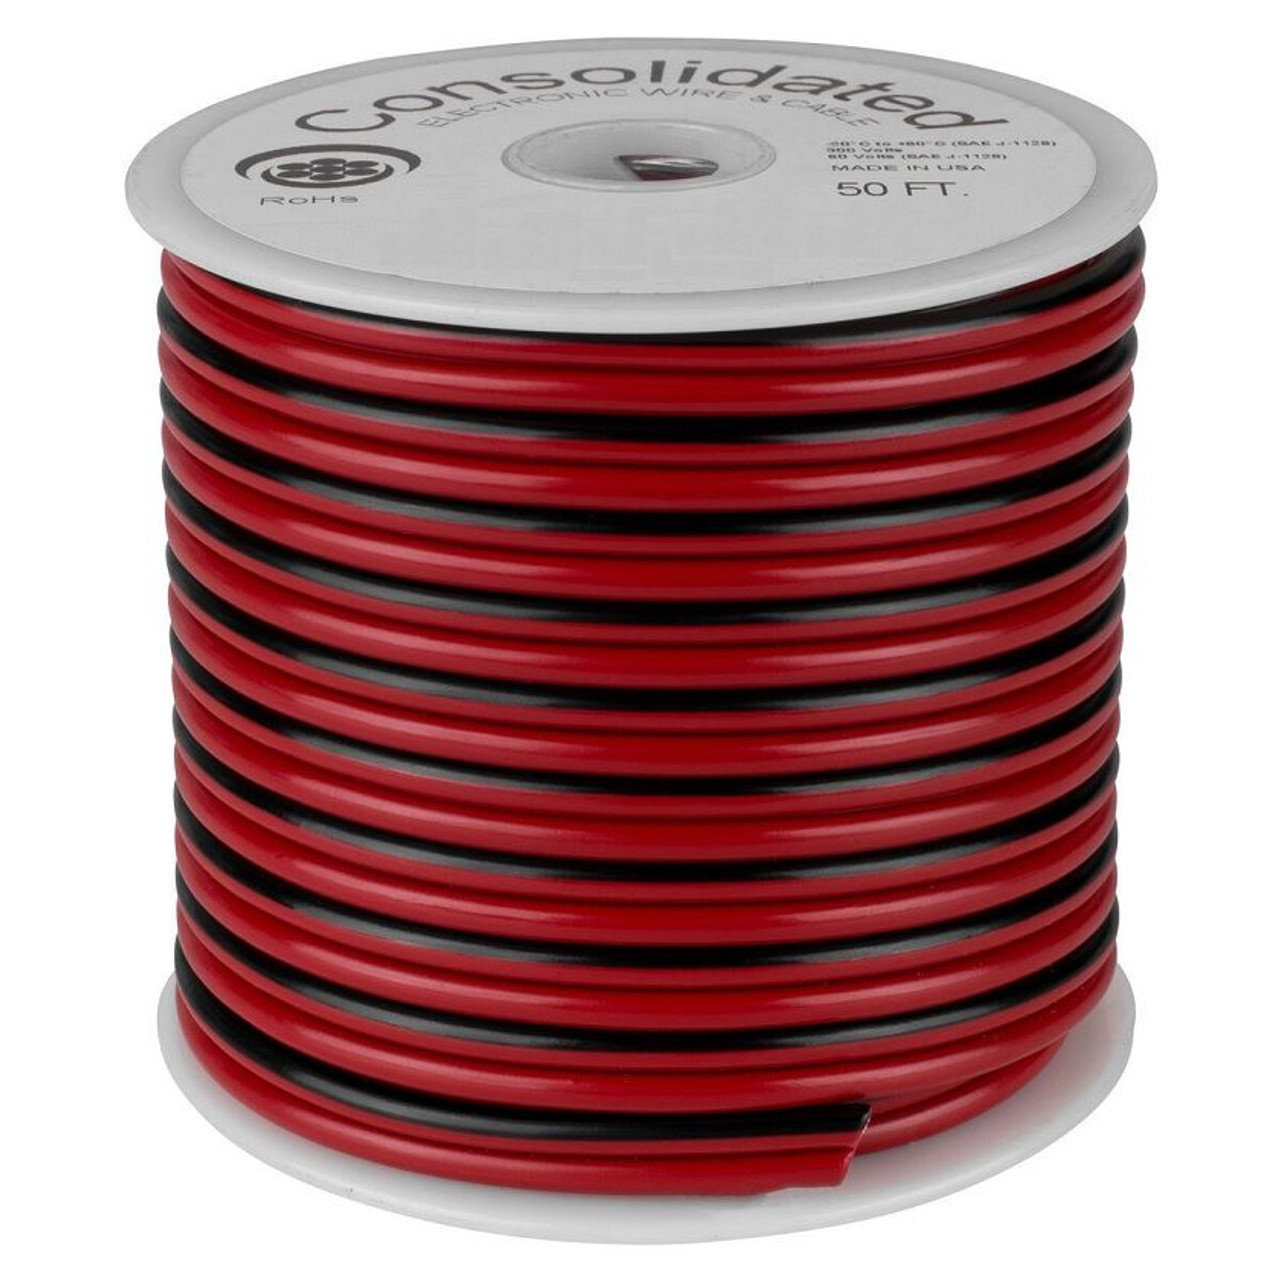 https://cdn11.bigcommerce.com/s-nnahwwwhci/images/stencil/1280x1280/products/15144/17439/red-black-100-foot-18-awg-stranded-zip-wire-7__20050.1663598617.jpg?c=1